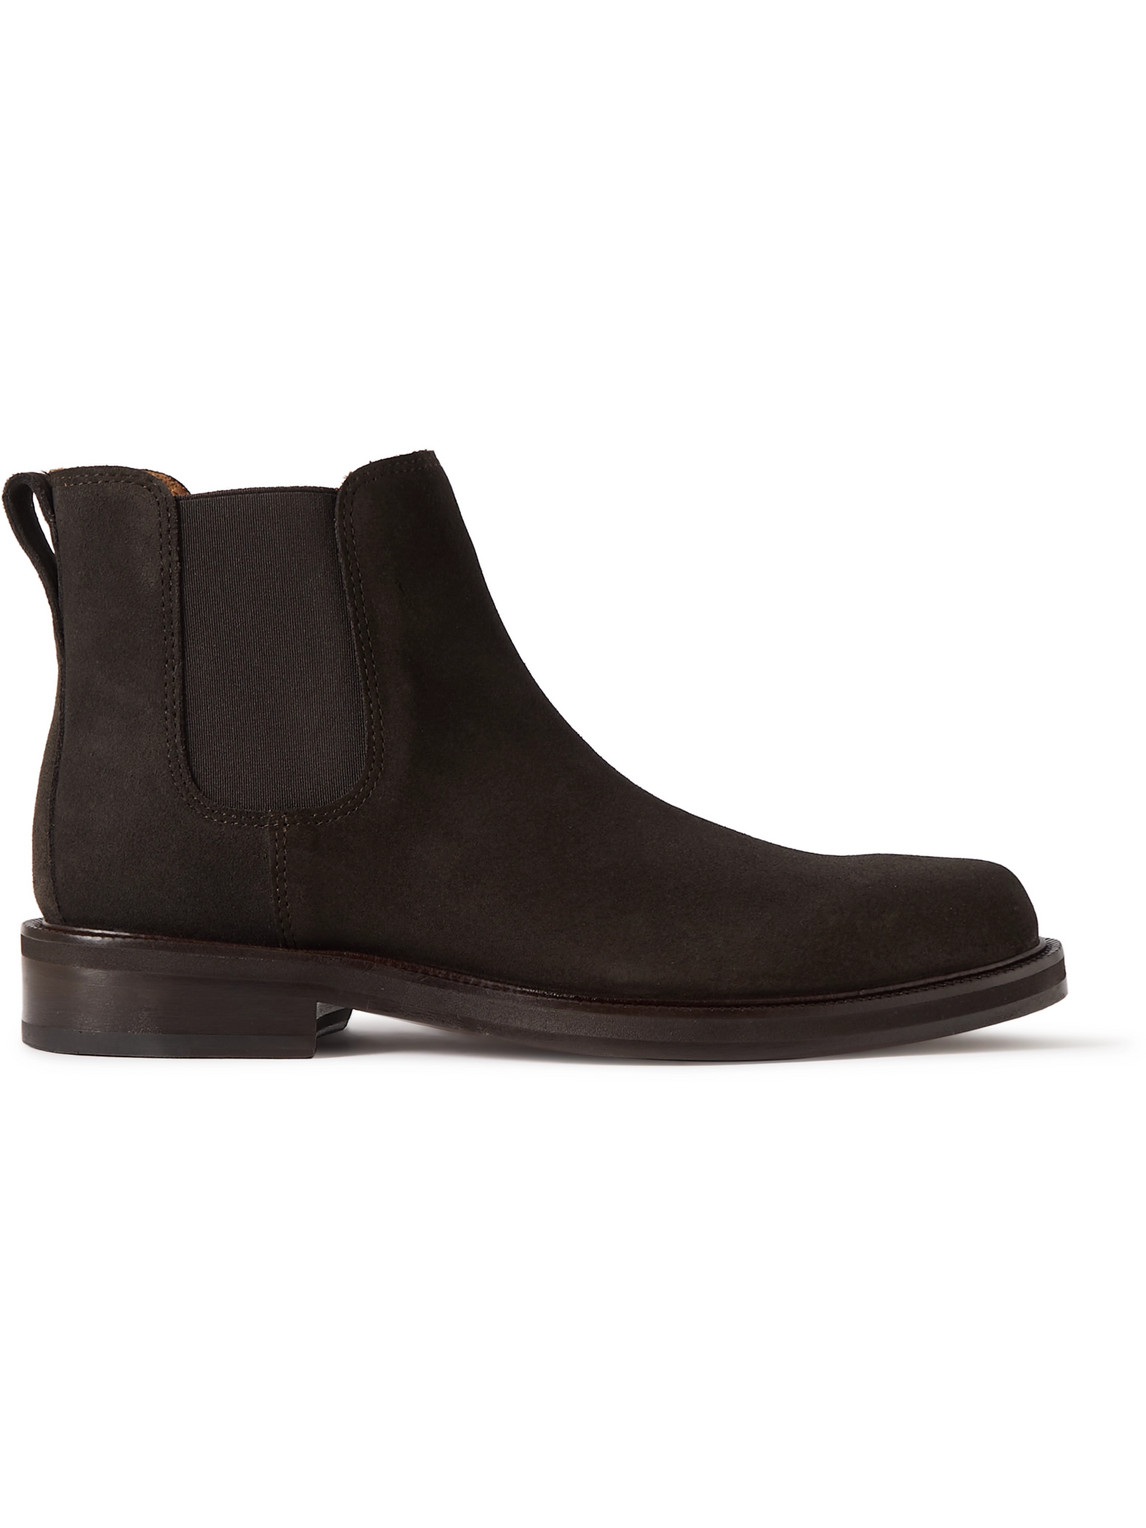 Mr P. Olie Suede Chelsea Boots In Brown